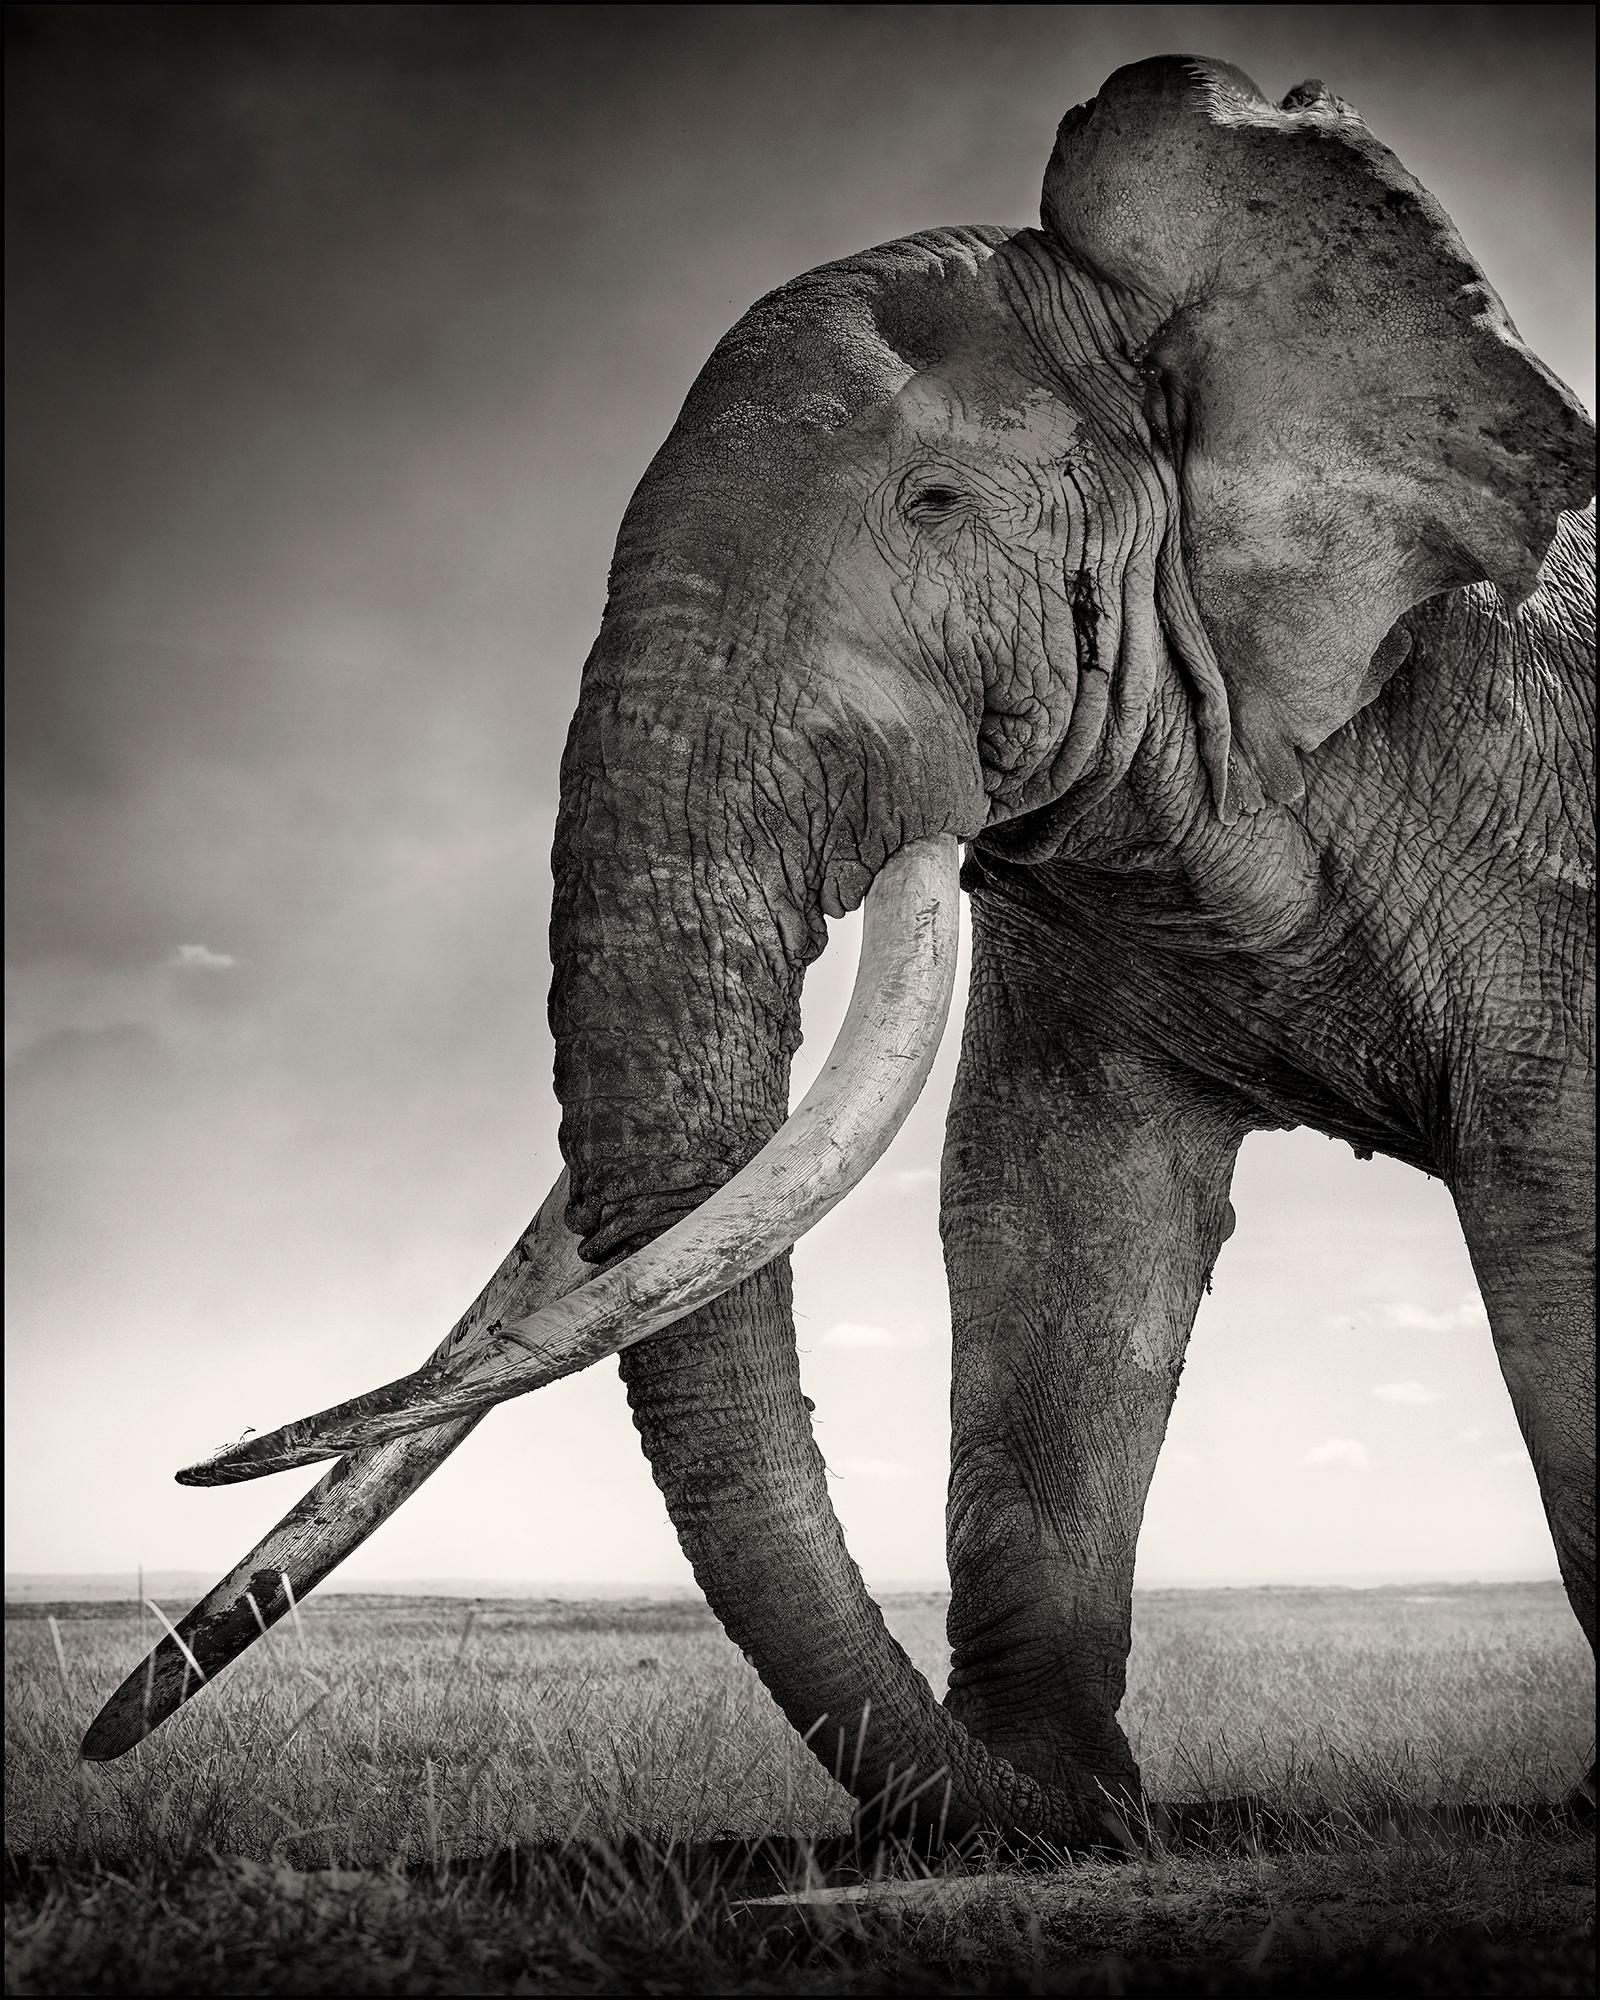 Tim - Guardian of Eden, Platinum, animal, elephant, black and white photography - Photograph by Joachim Schmeisser